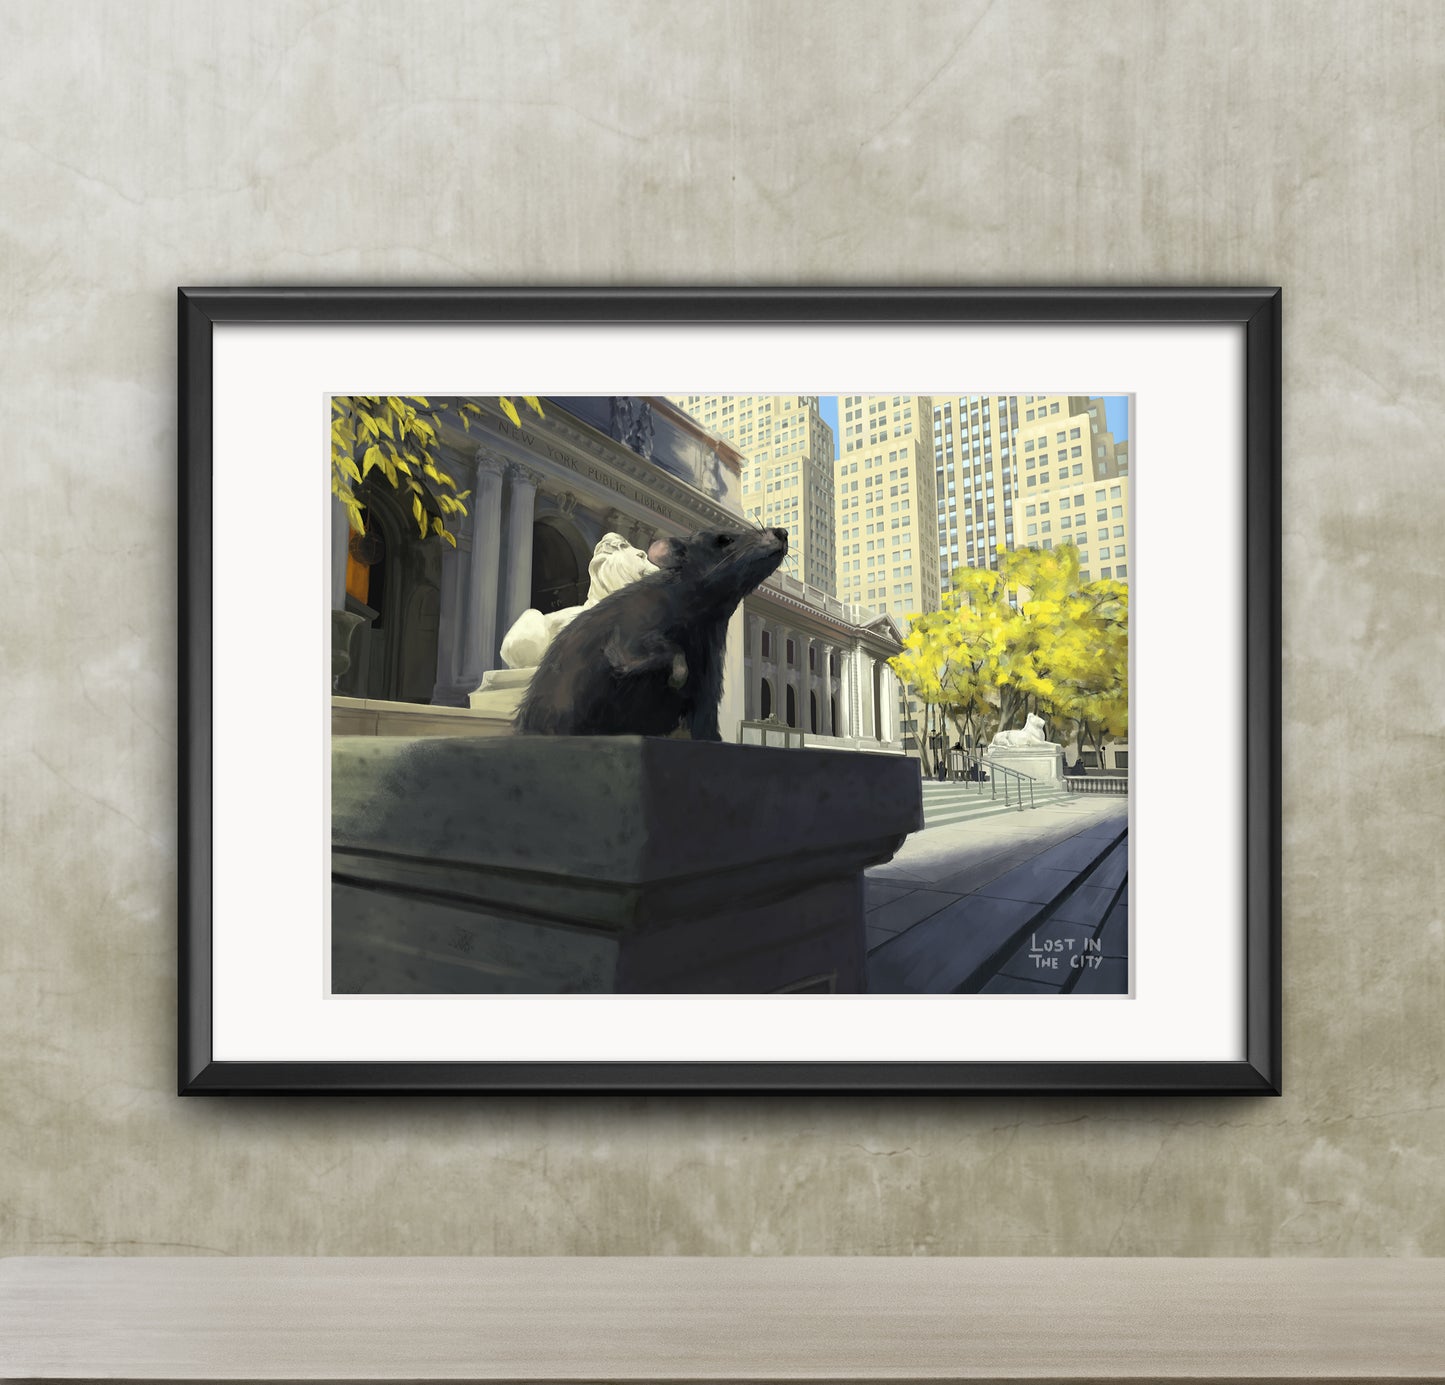 Library Rat Print | Lost in the City